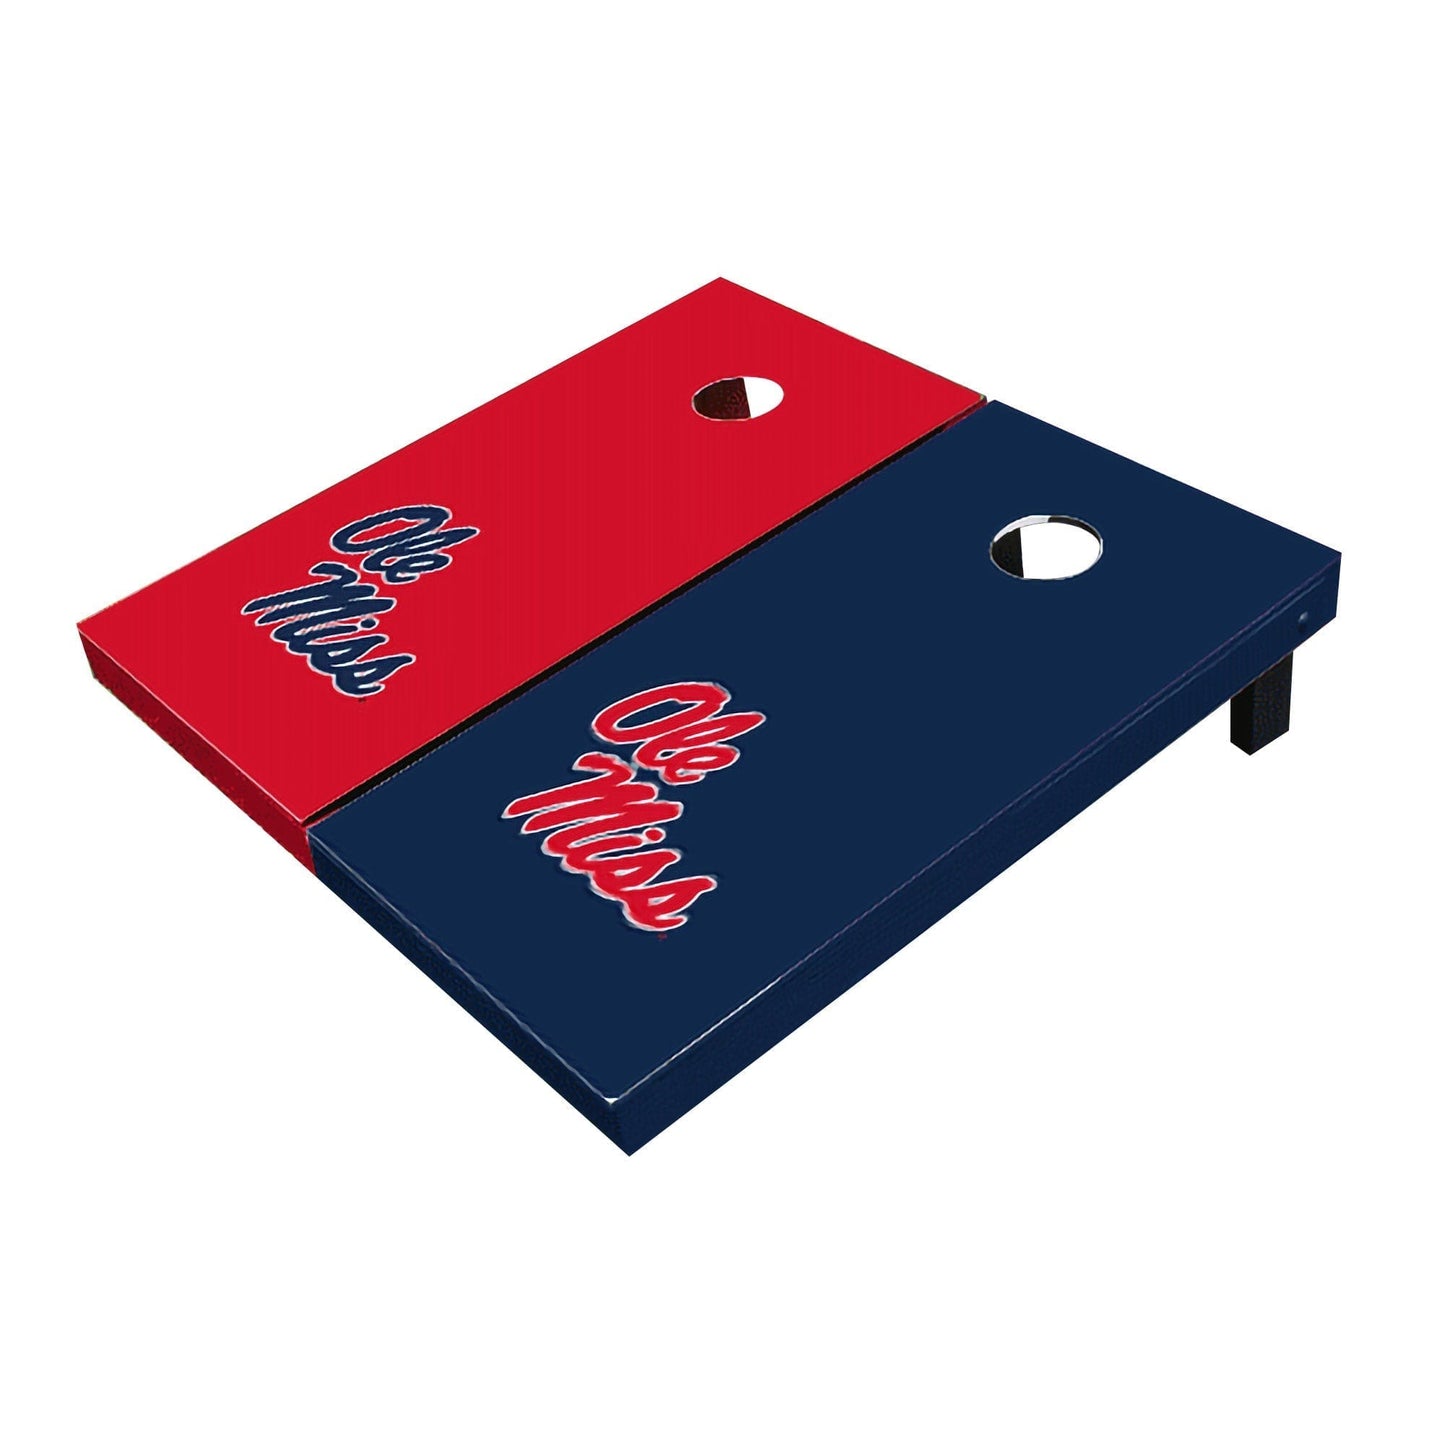 Ole Miss Rebels Alternating Solid All-Weather Cornhole Boards